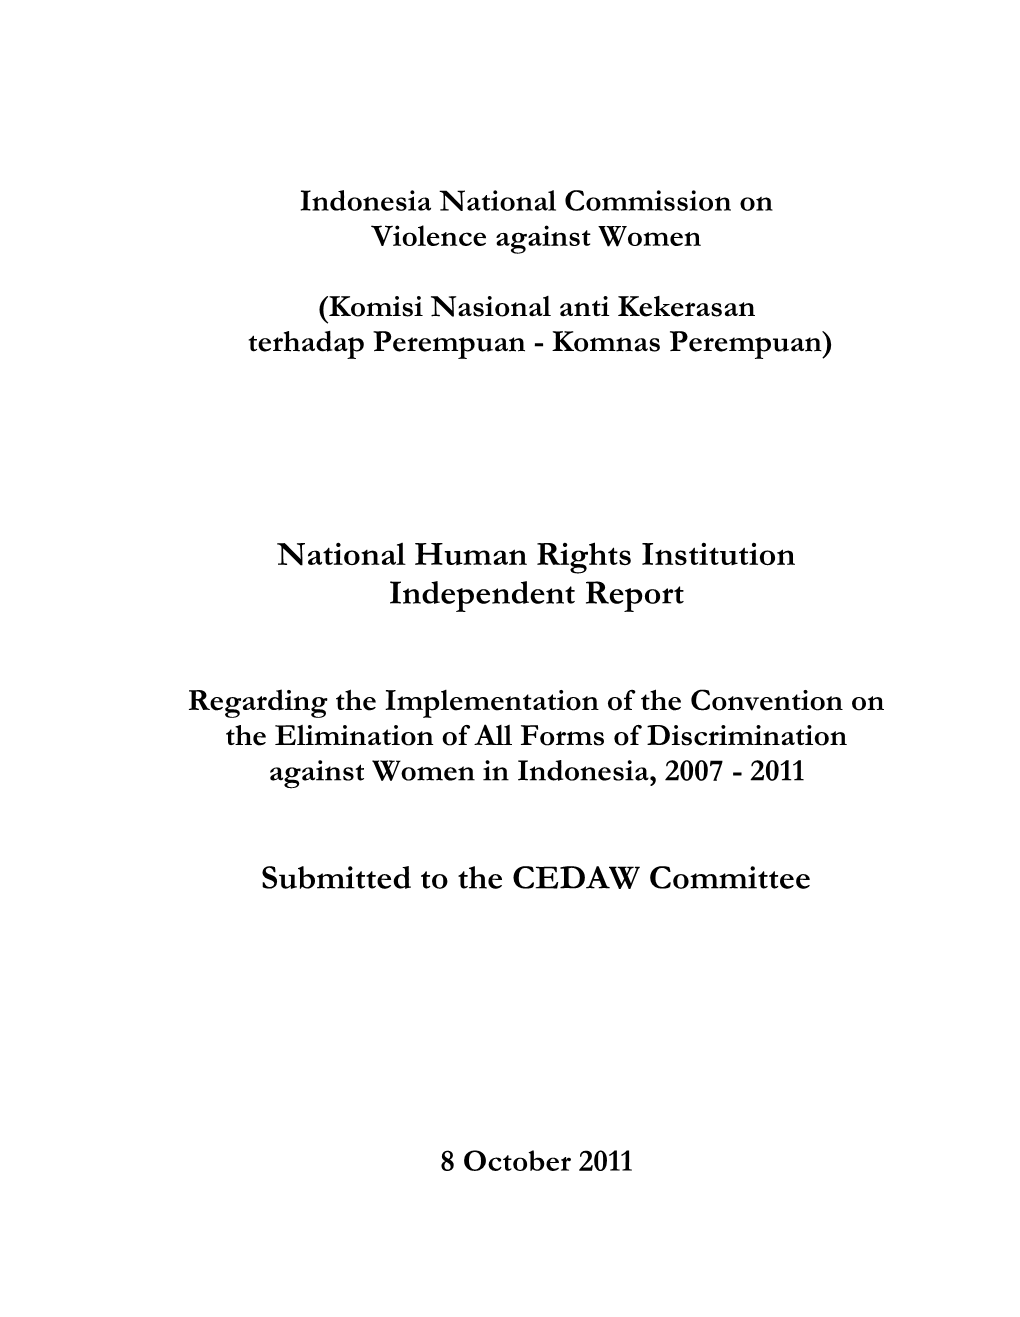 National Human Rights Institution Independent Report Submitted To